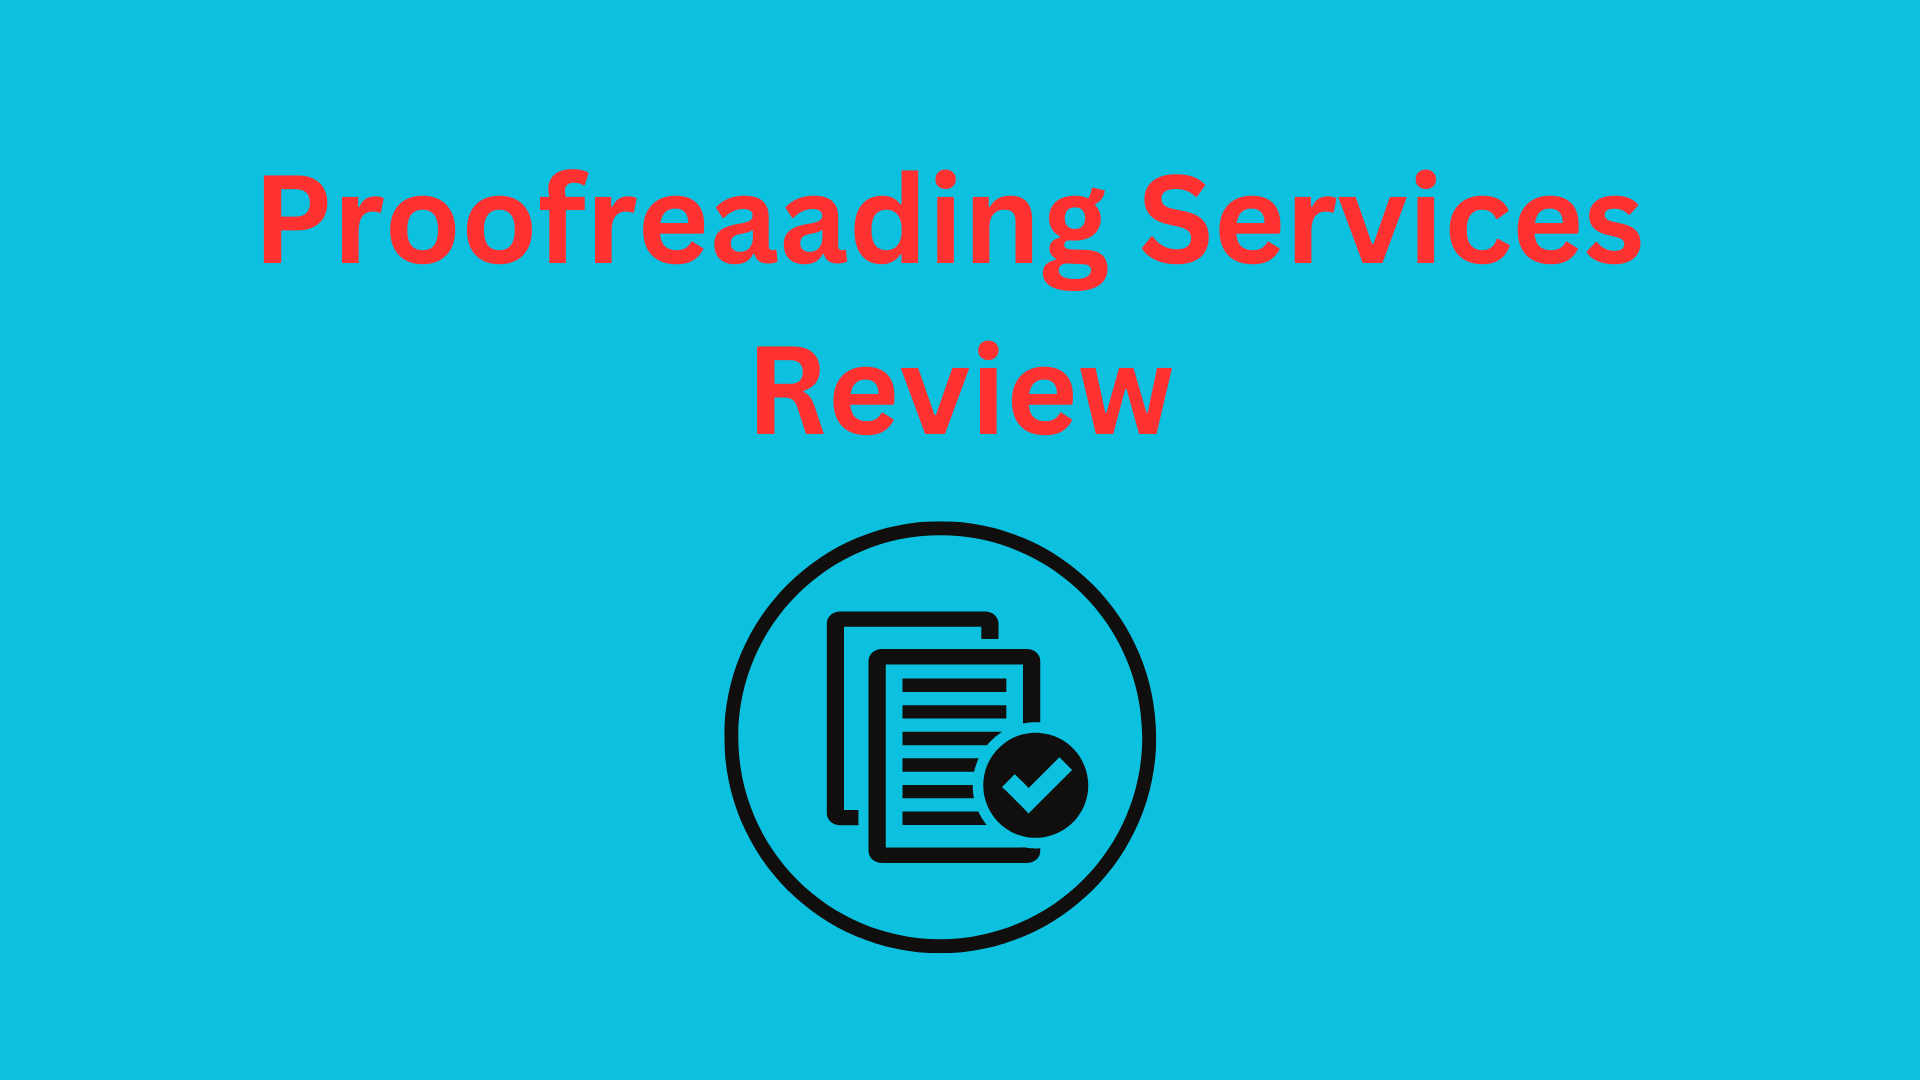 Proofreading Services Review